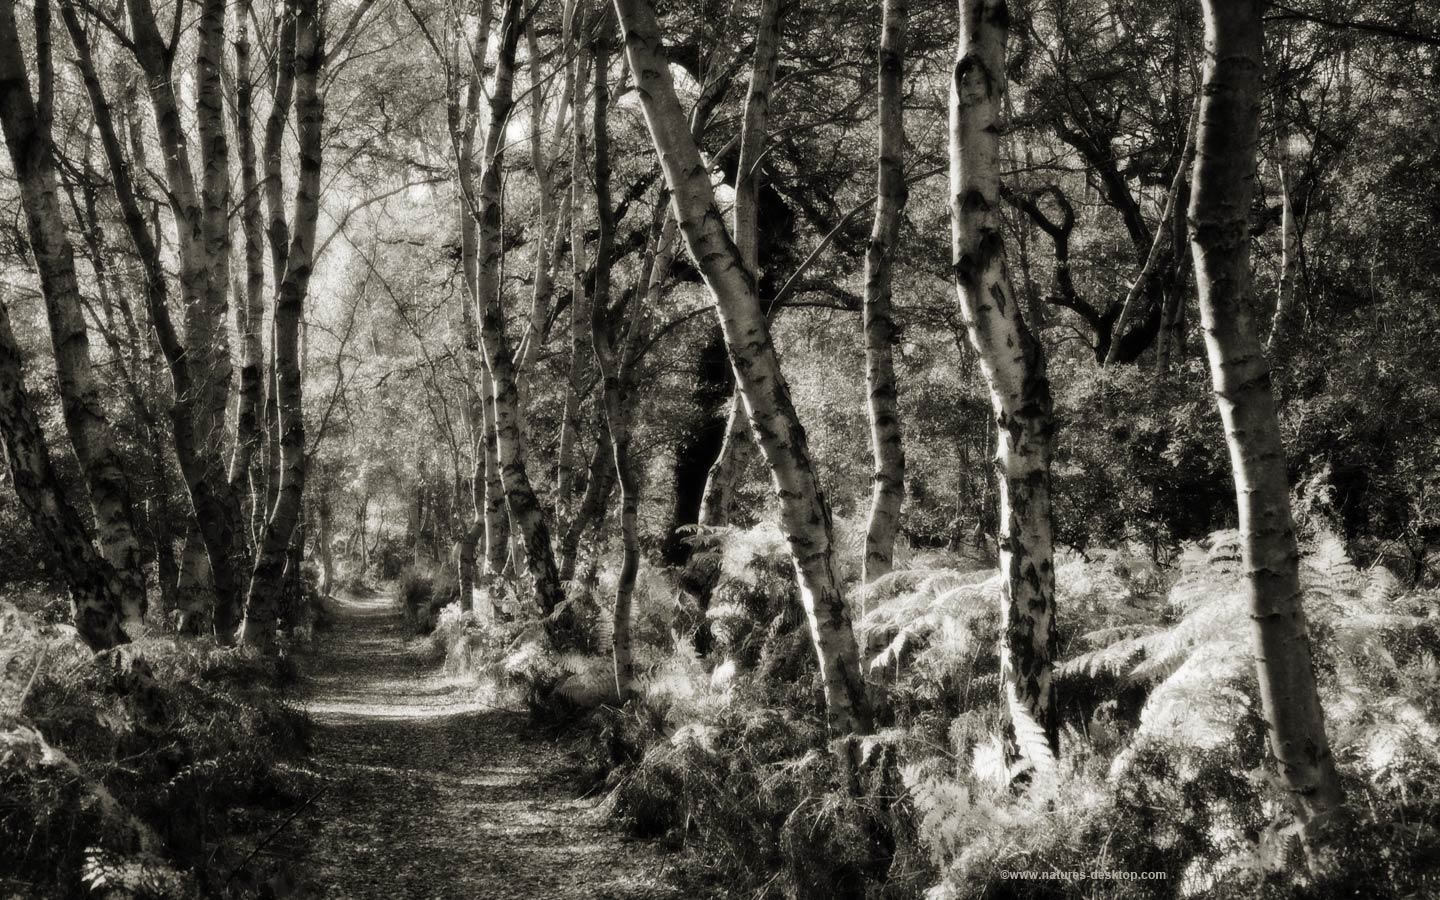 Desktop Wallpaper Picture Of A Woodland Path Lined With Silver Birch